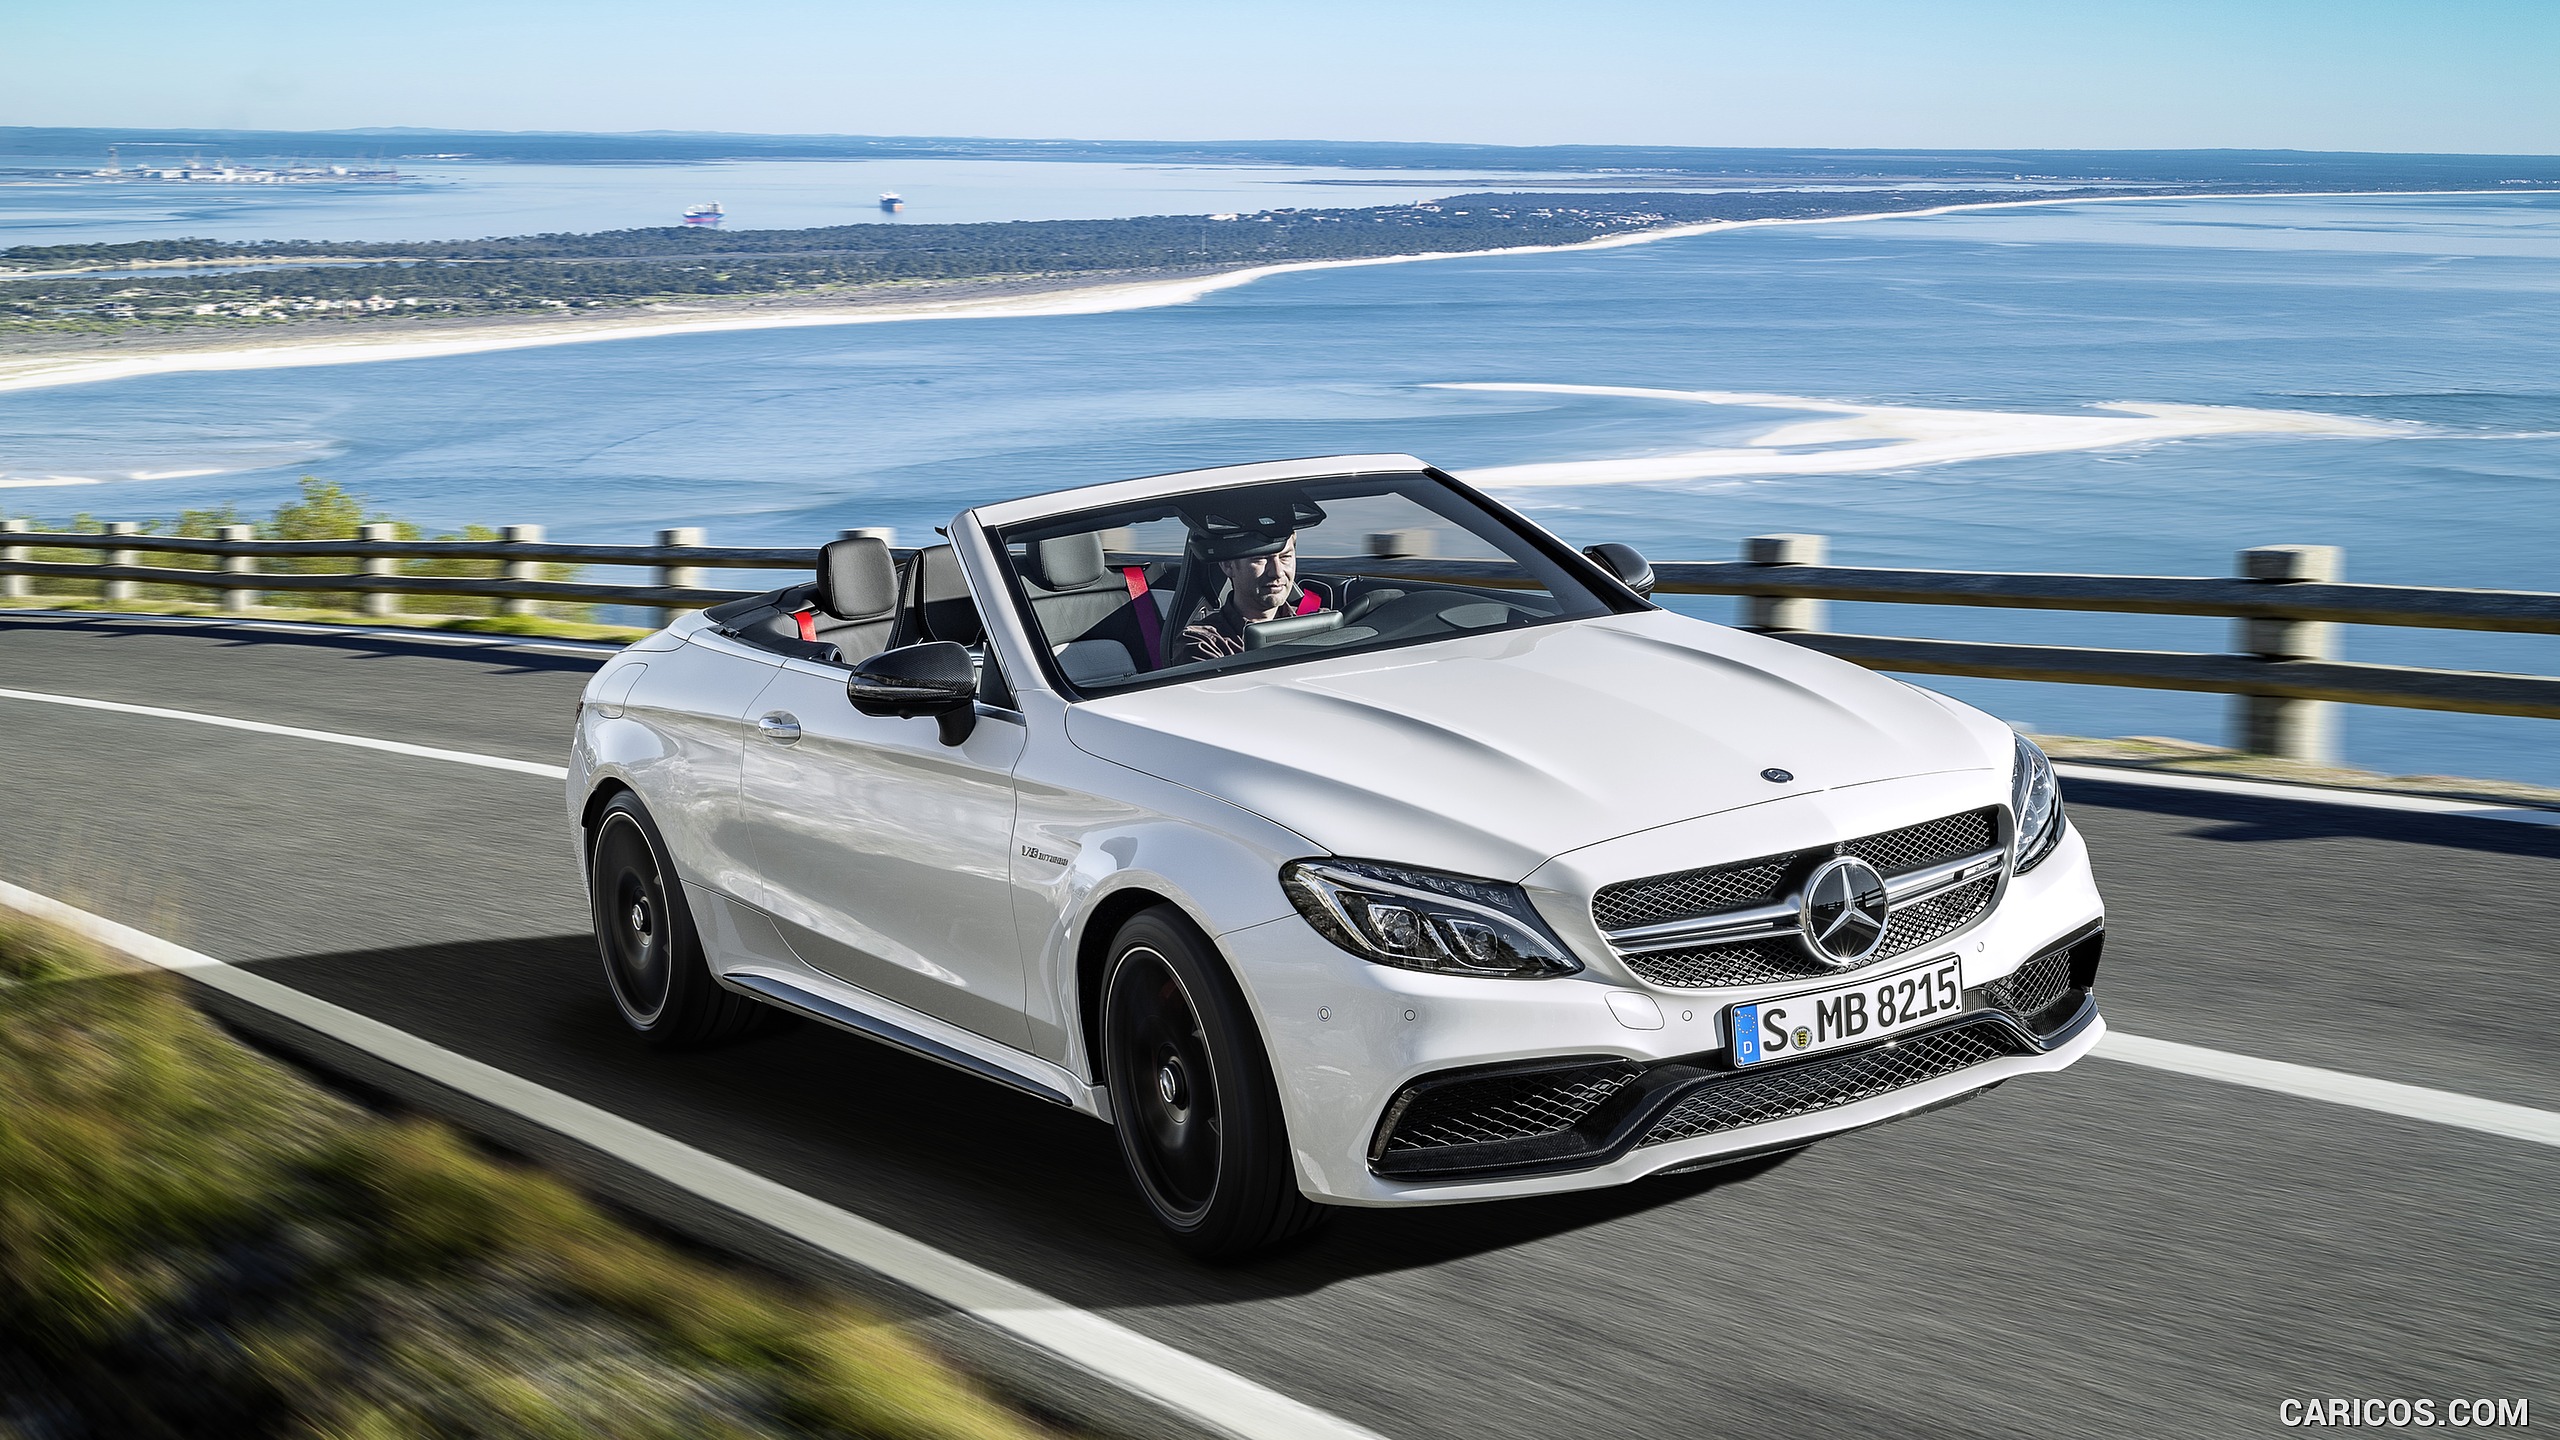 2017 Mercedes-AMG C63 S Cabriolet (Chassis: A205, Color: Designo Diamond White Bright) - Front, #12 of 222